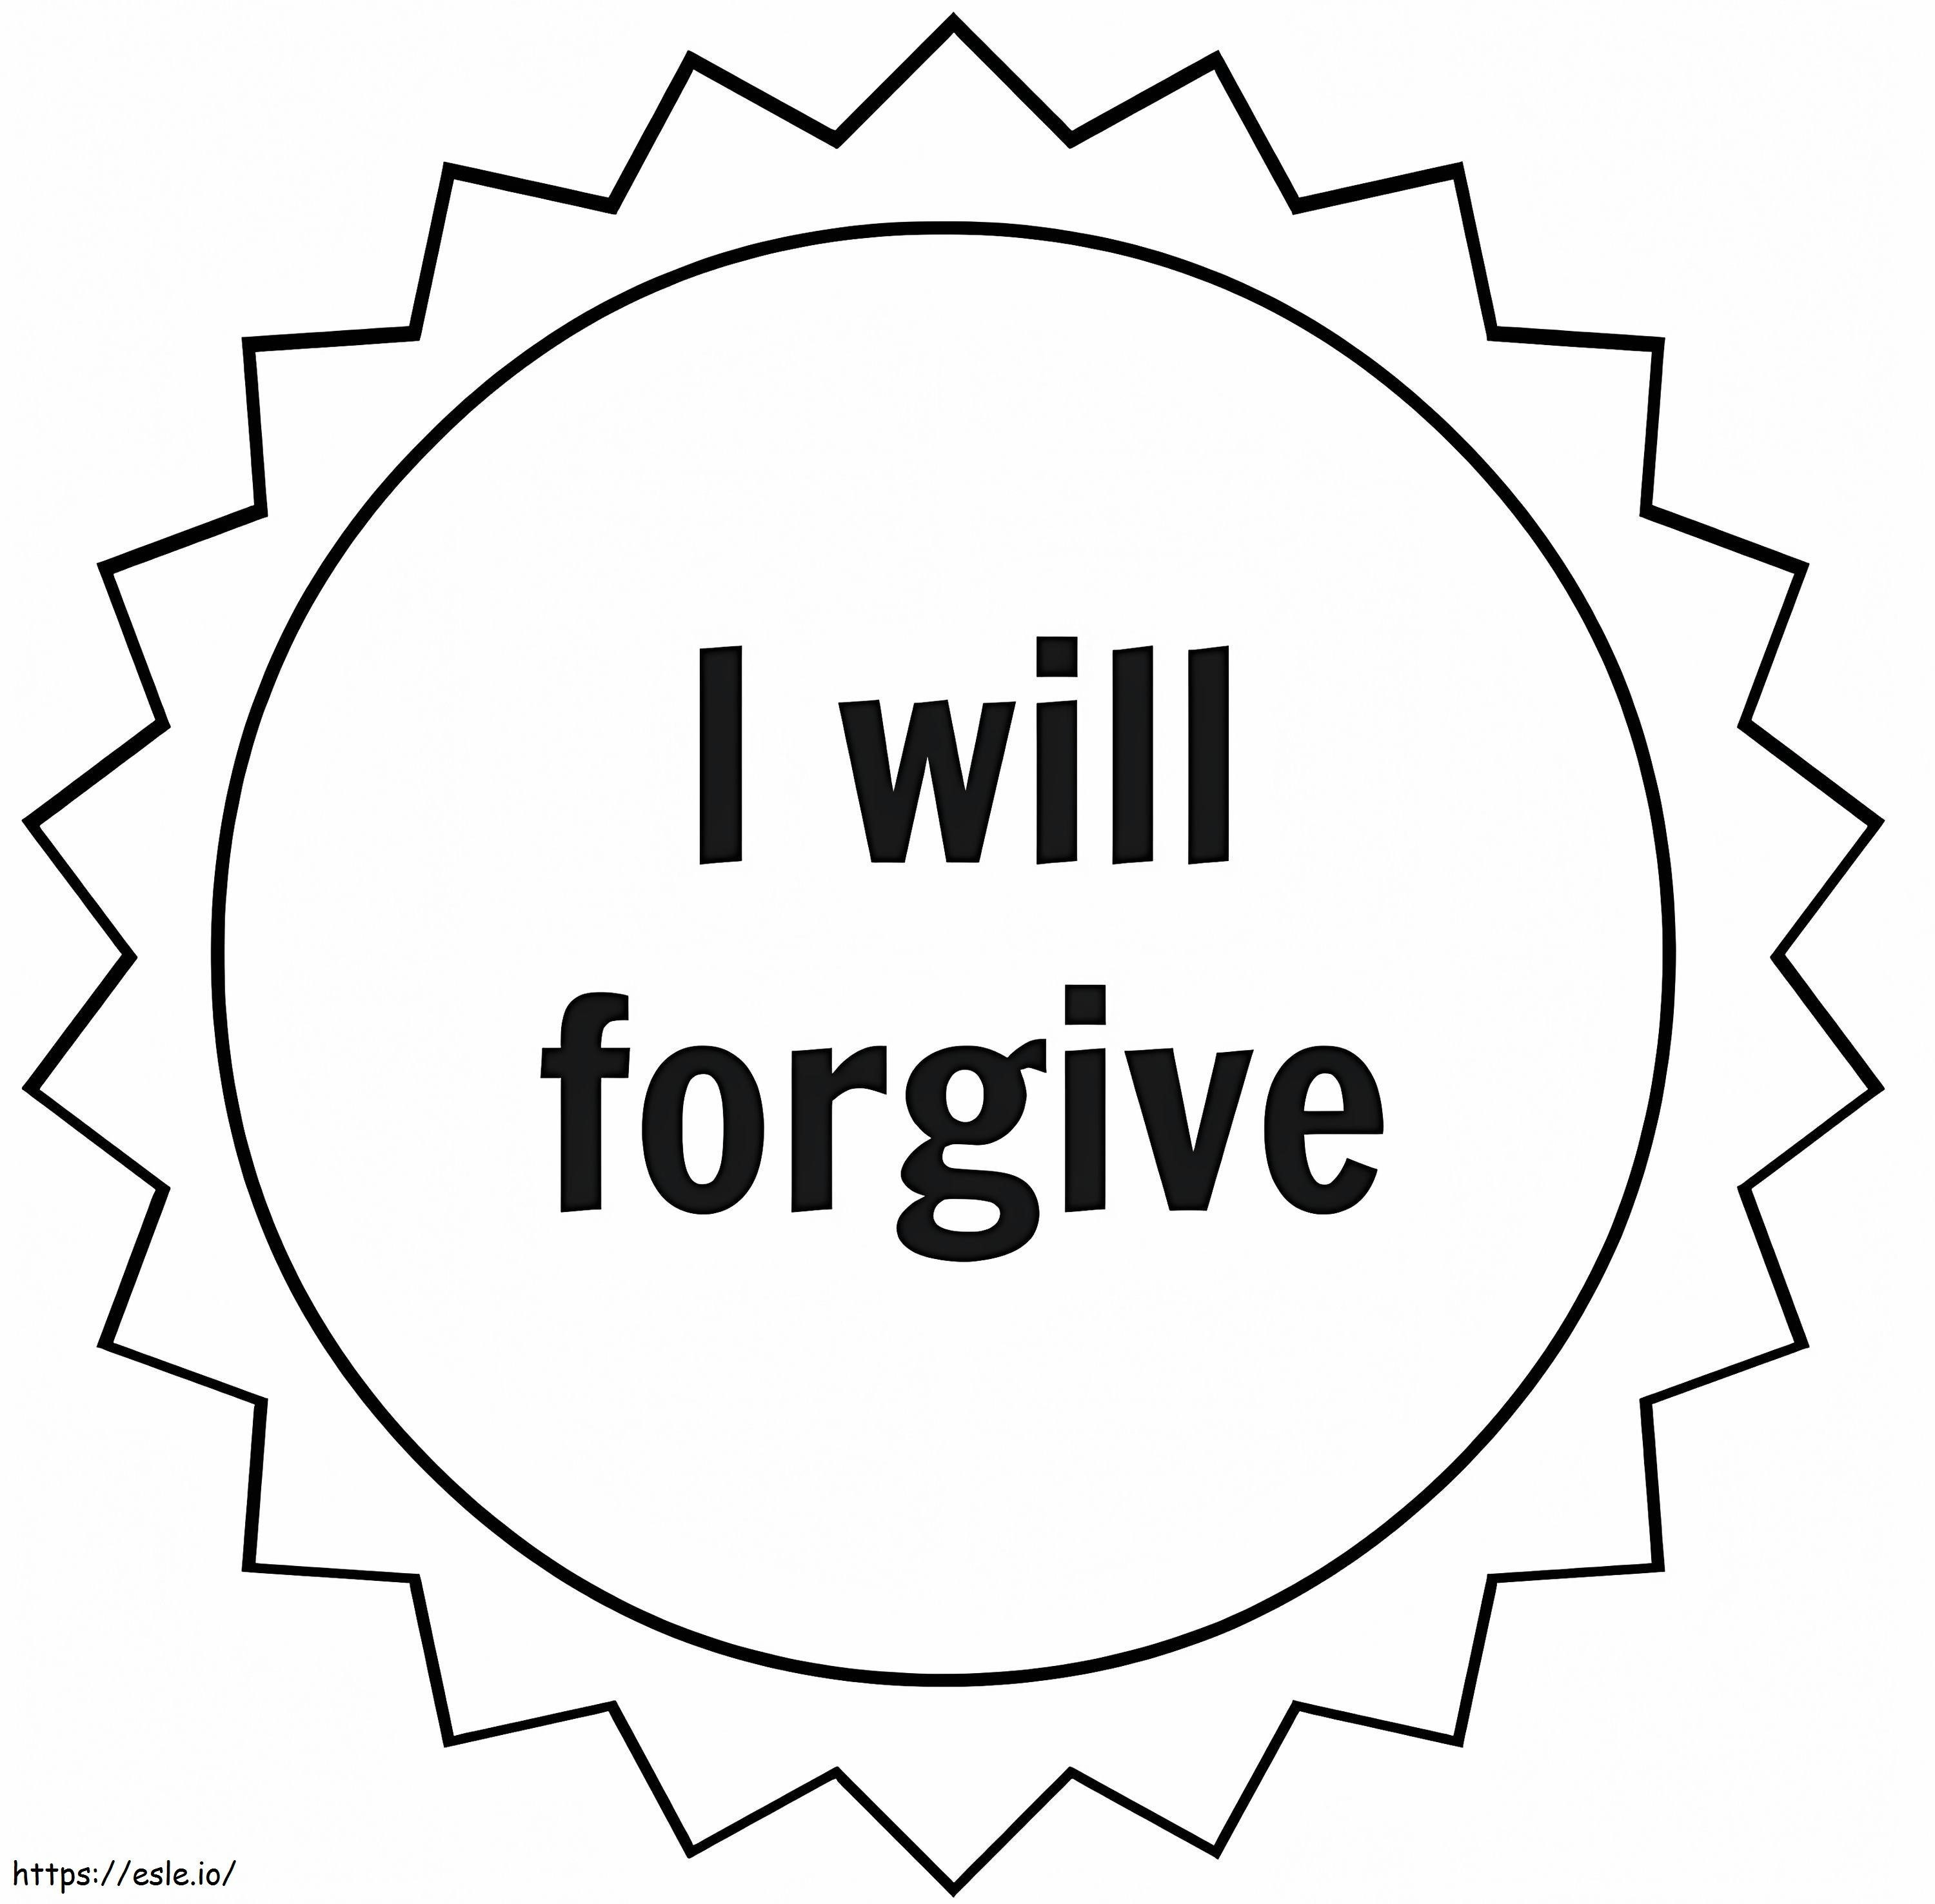 I Will Forgive coloring page